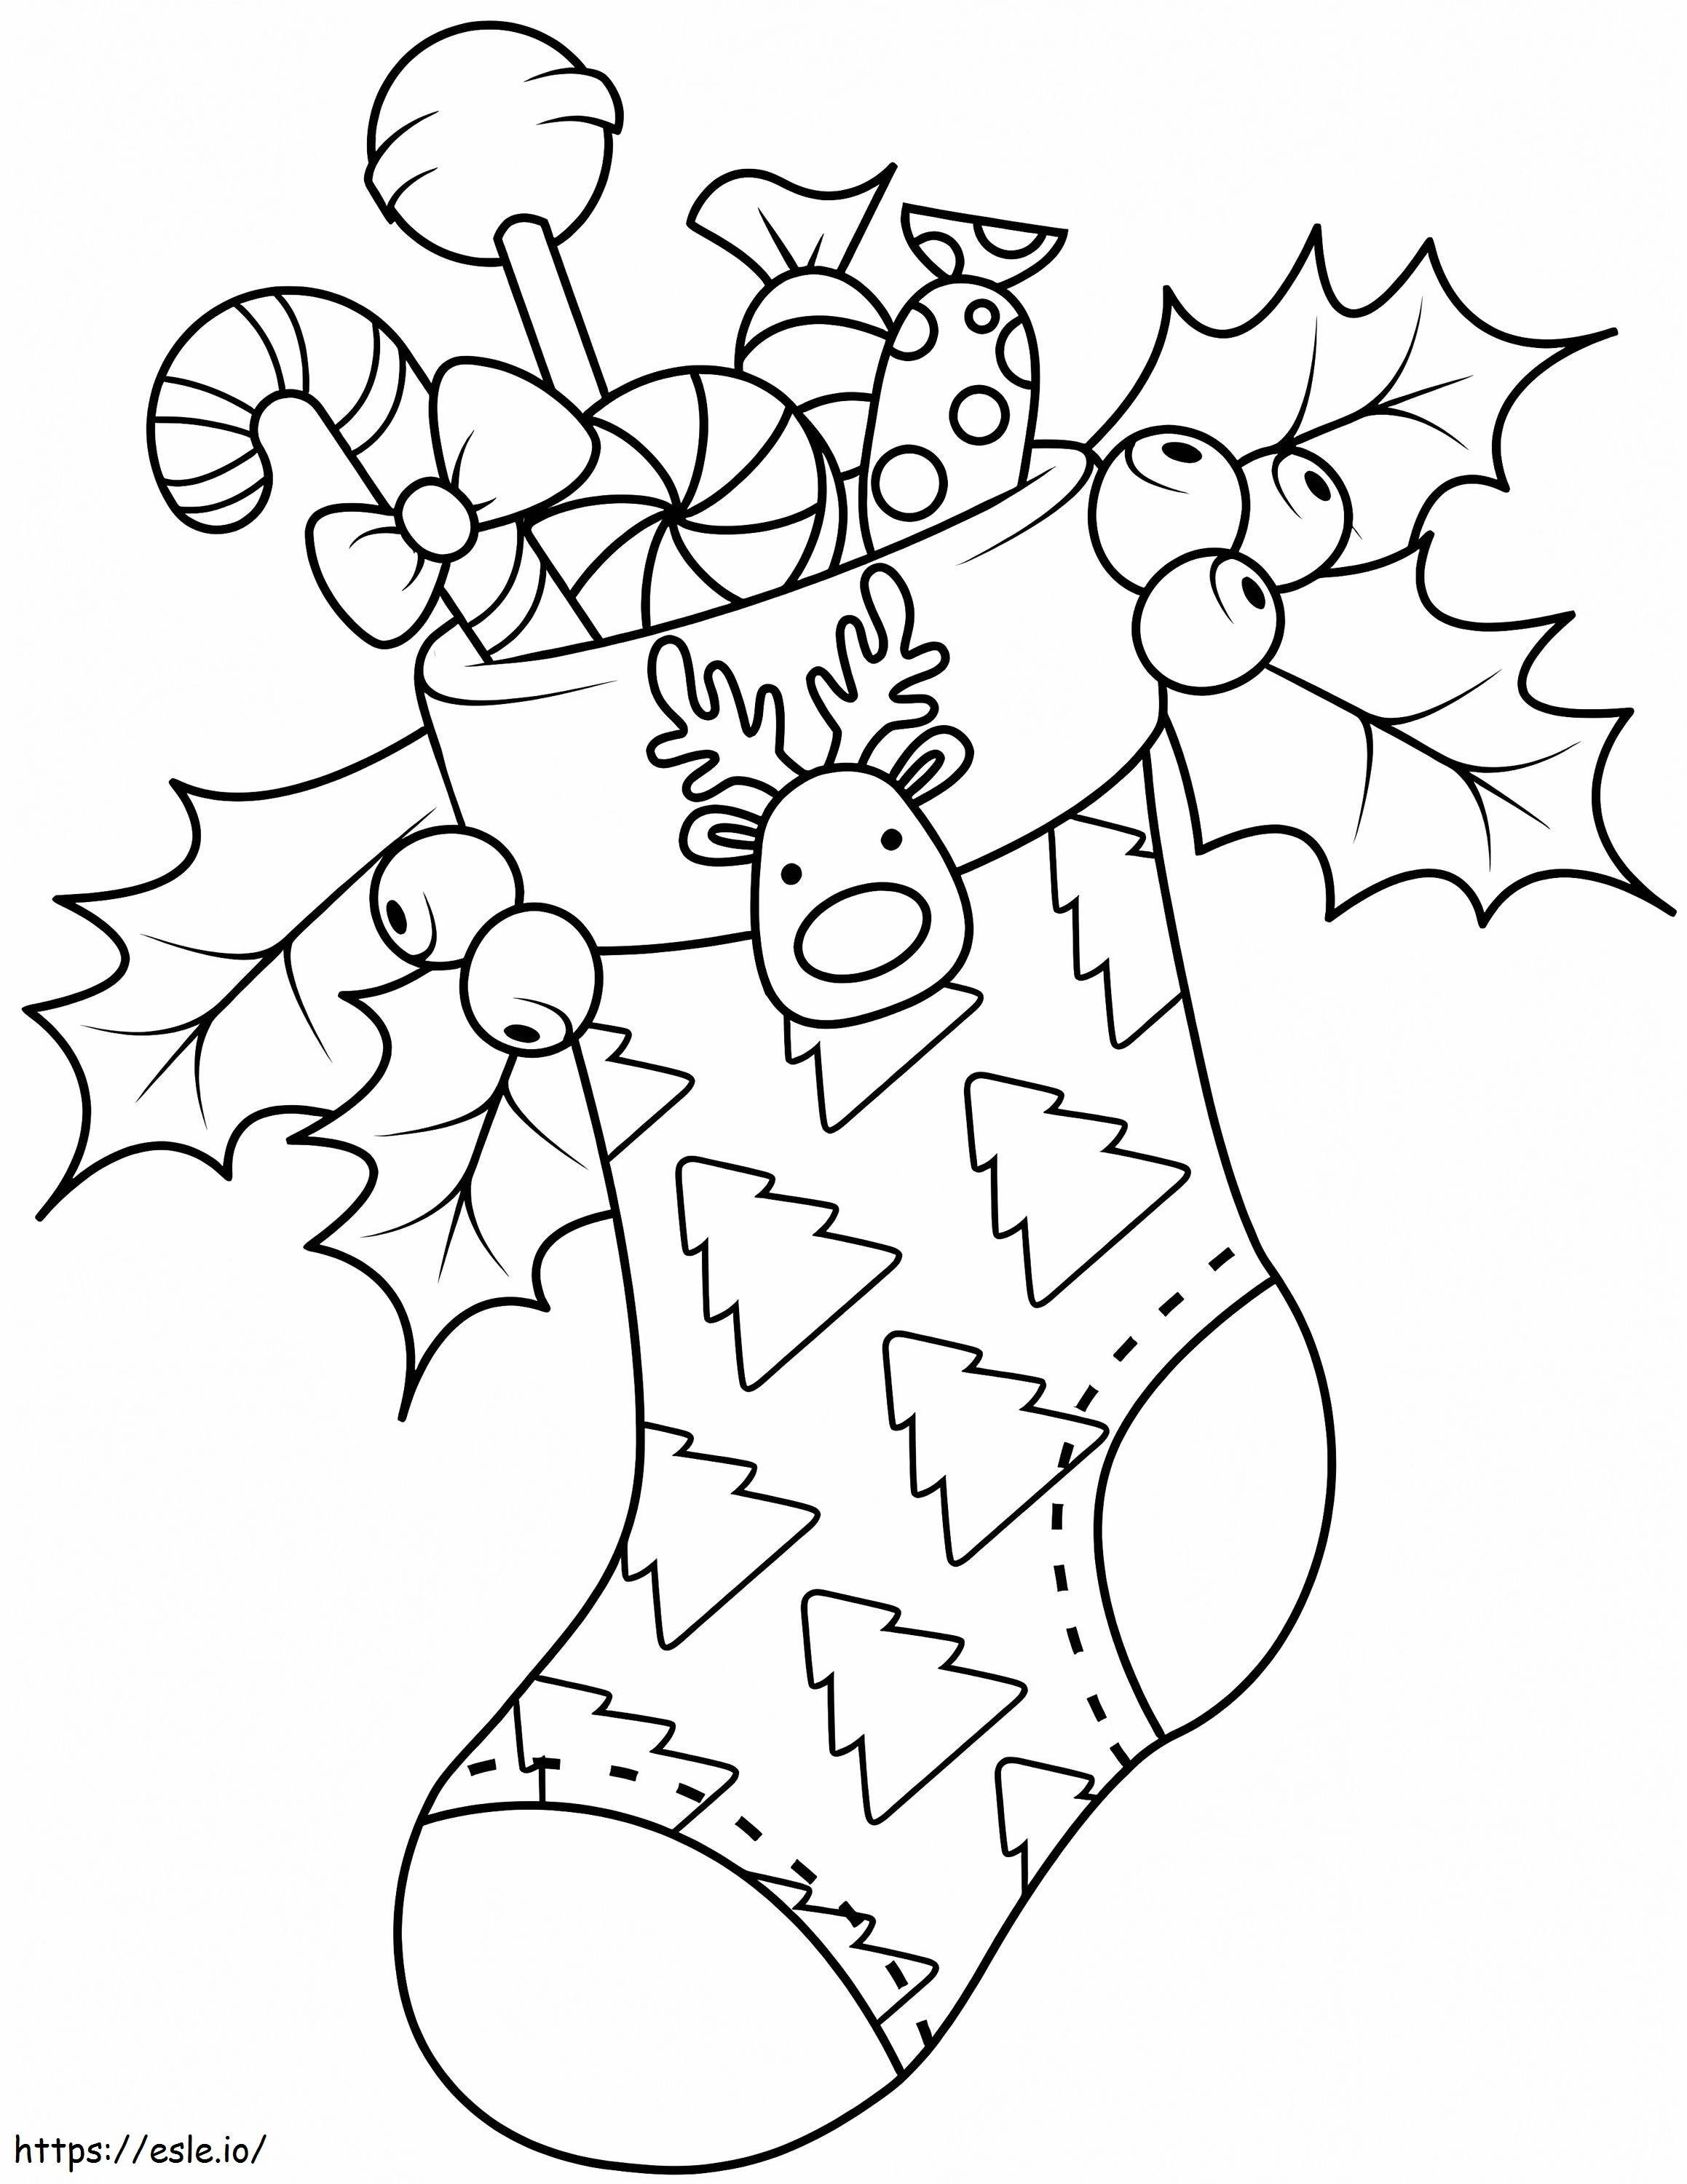 Christmas Stocking 1 coloring page